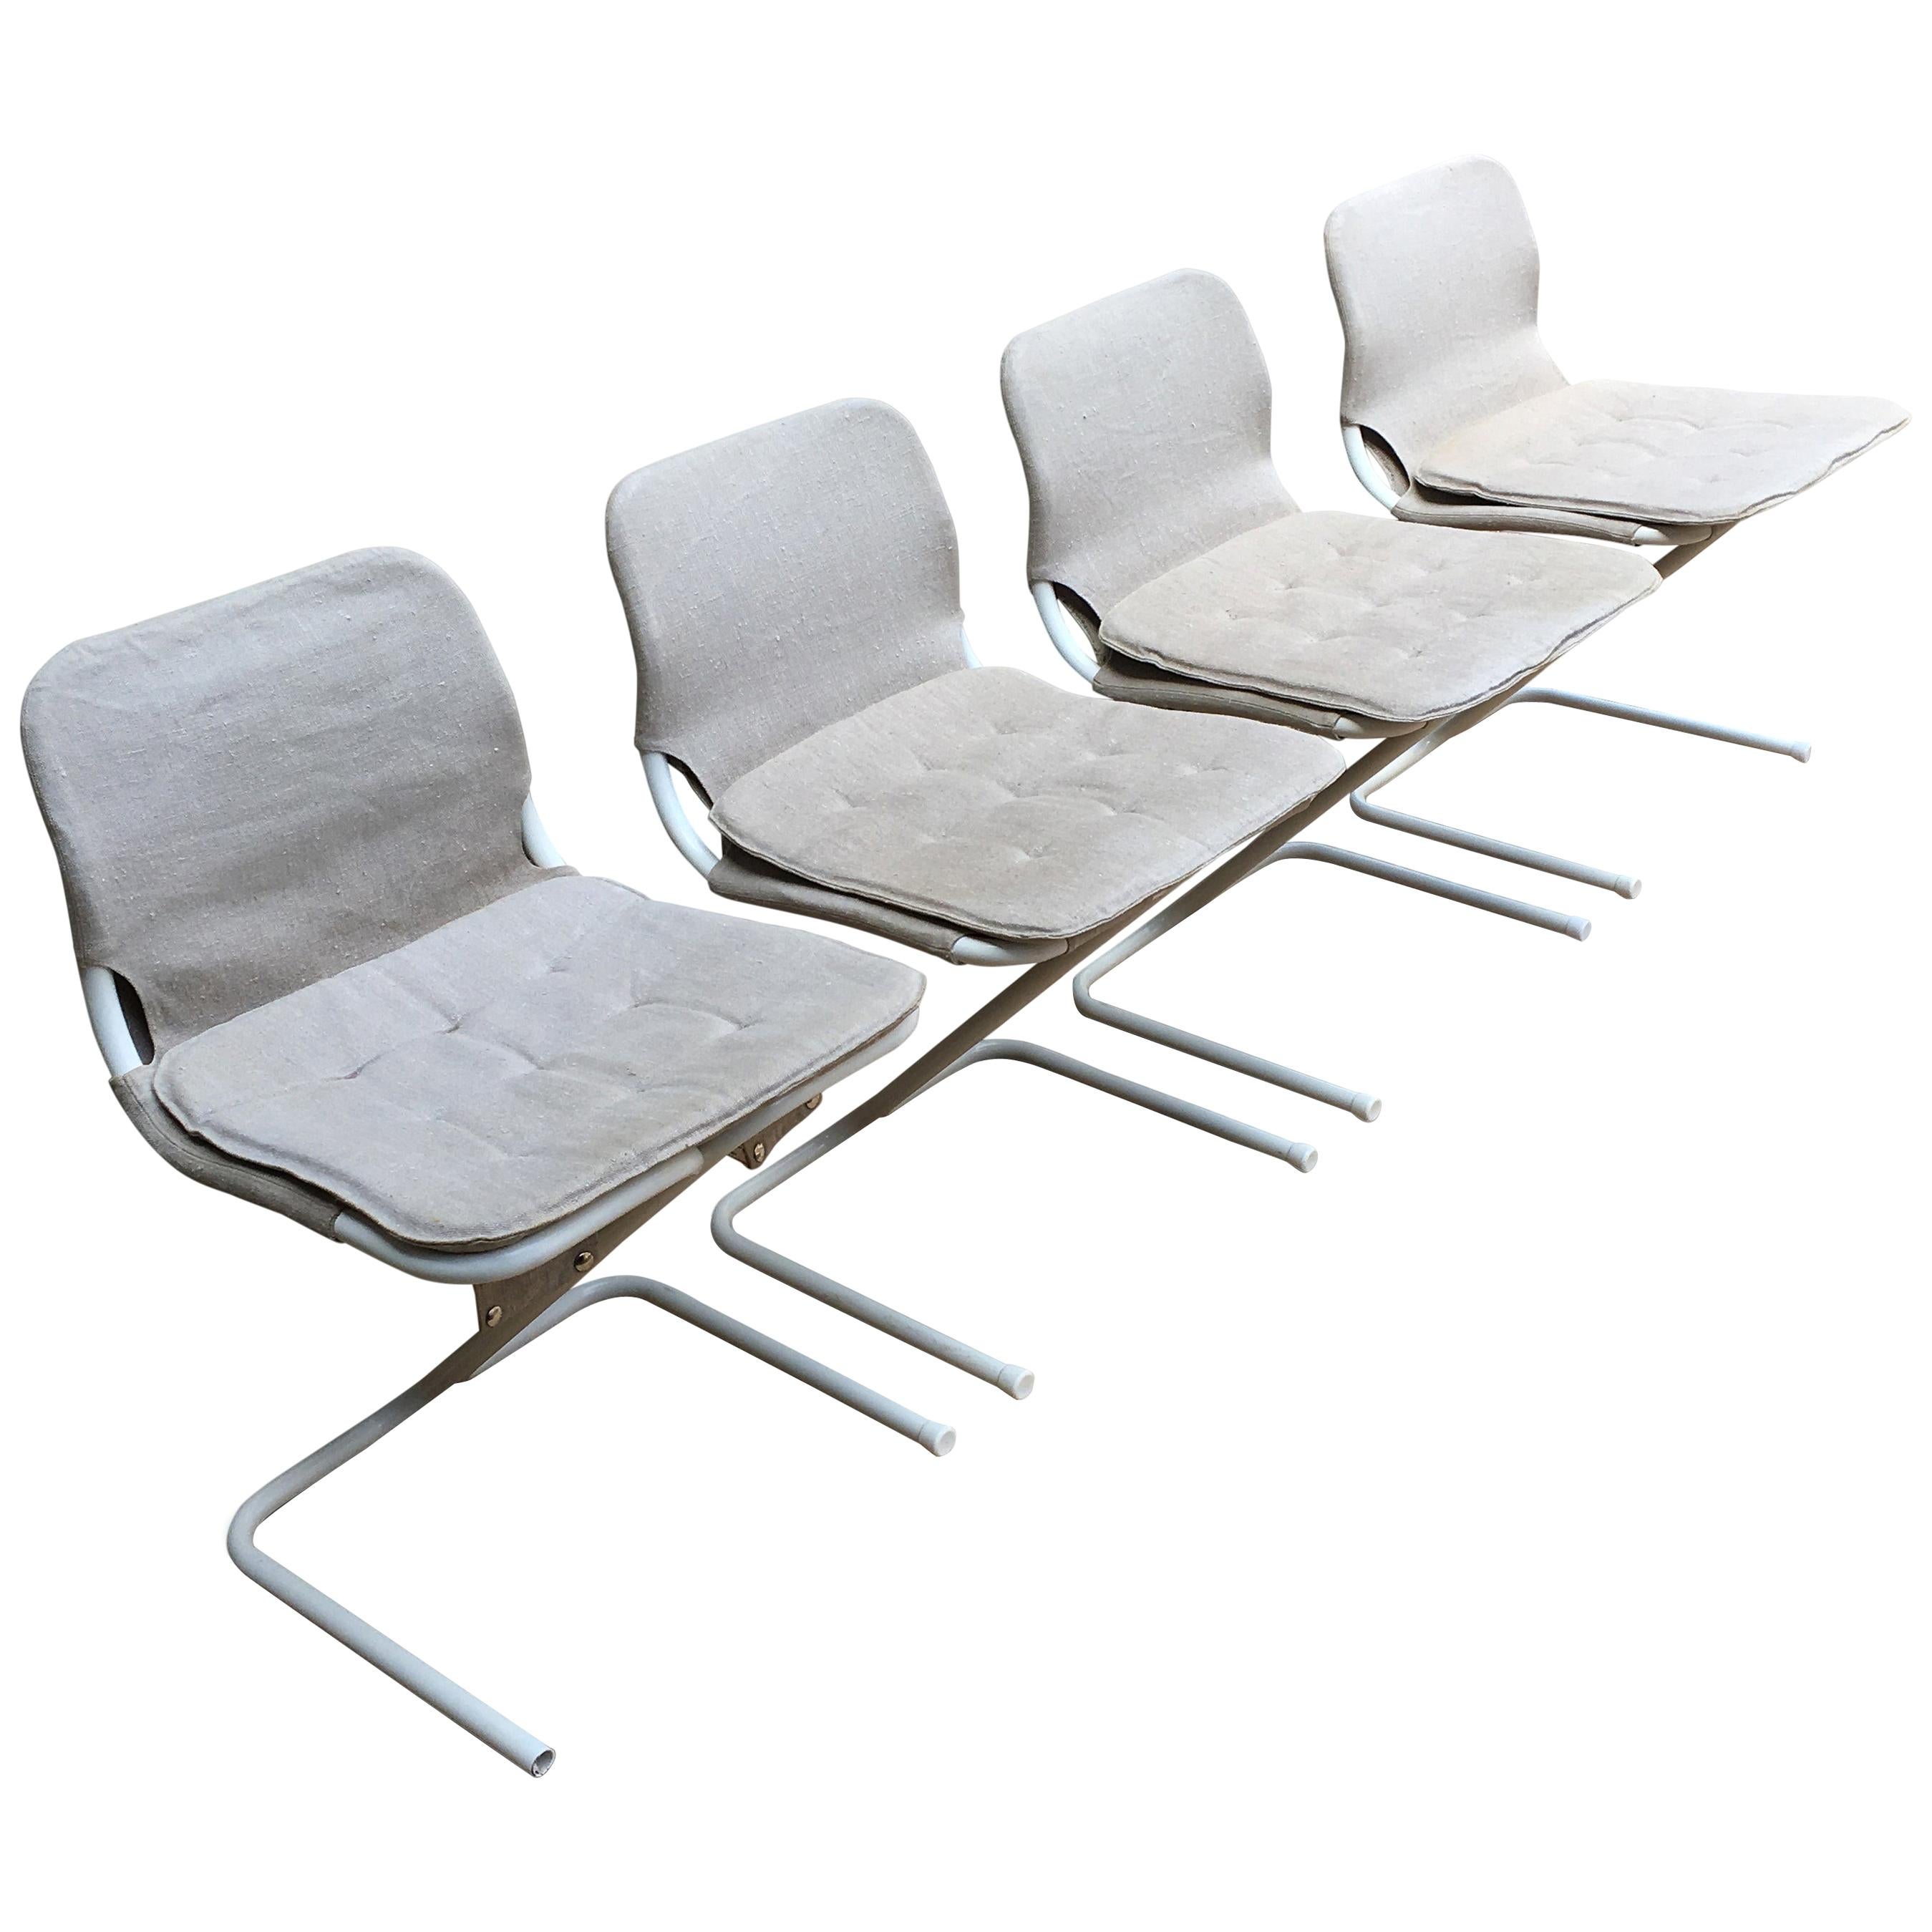 4 Midcentury Swedish White Metal Stackable Chairs from DUX, 1968 For Sale